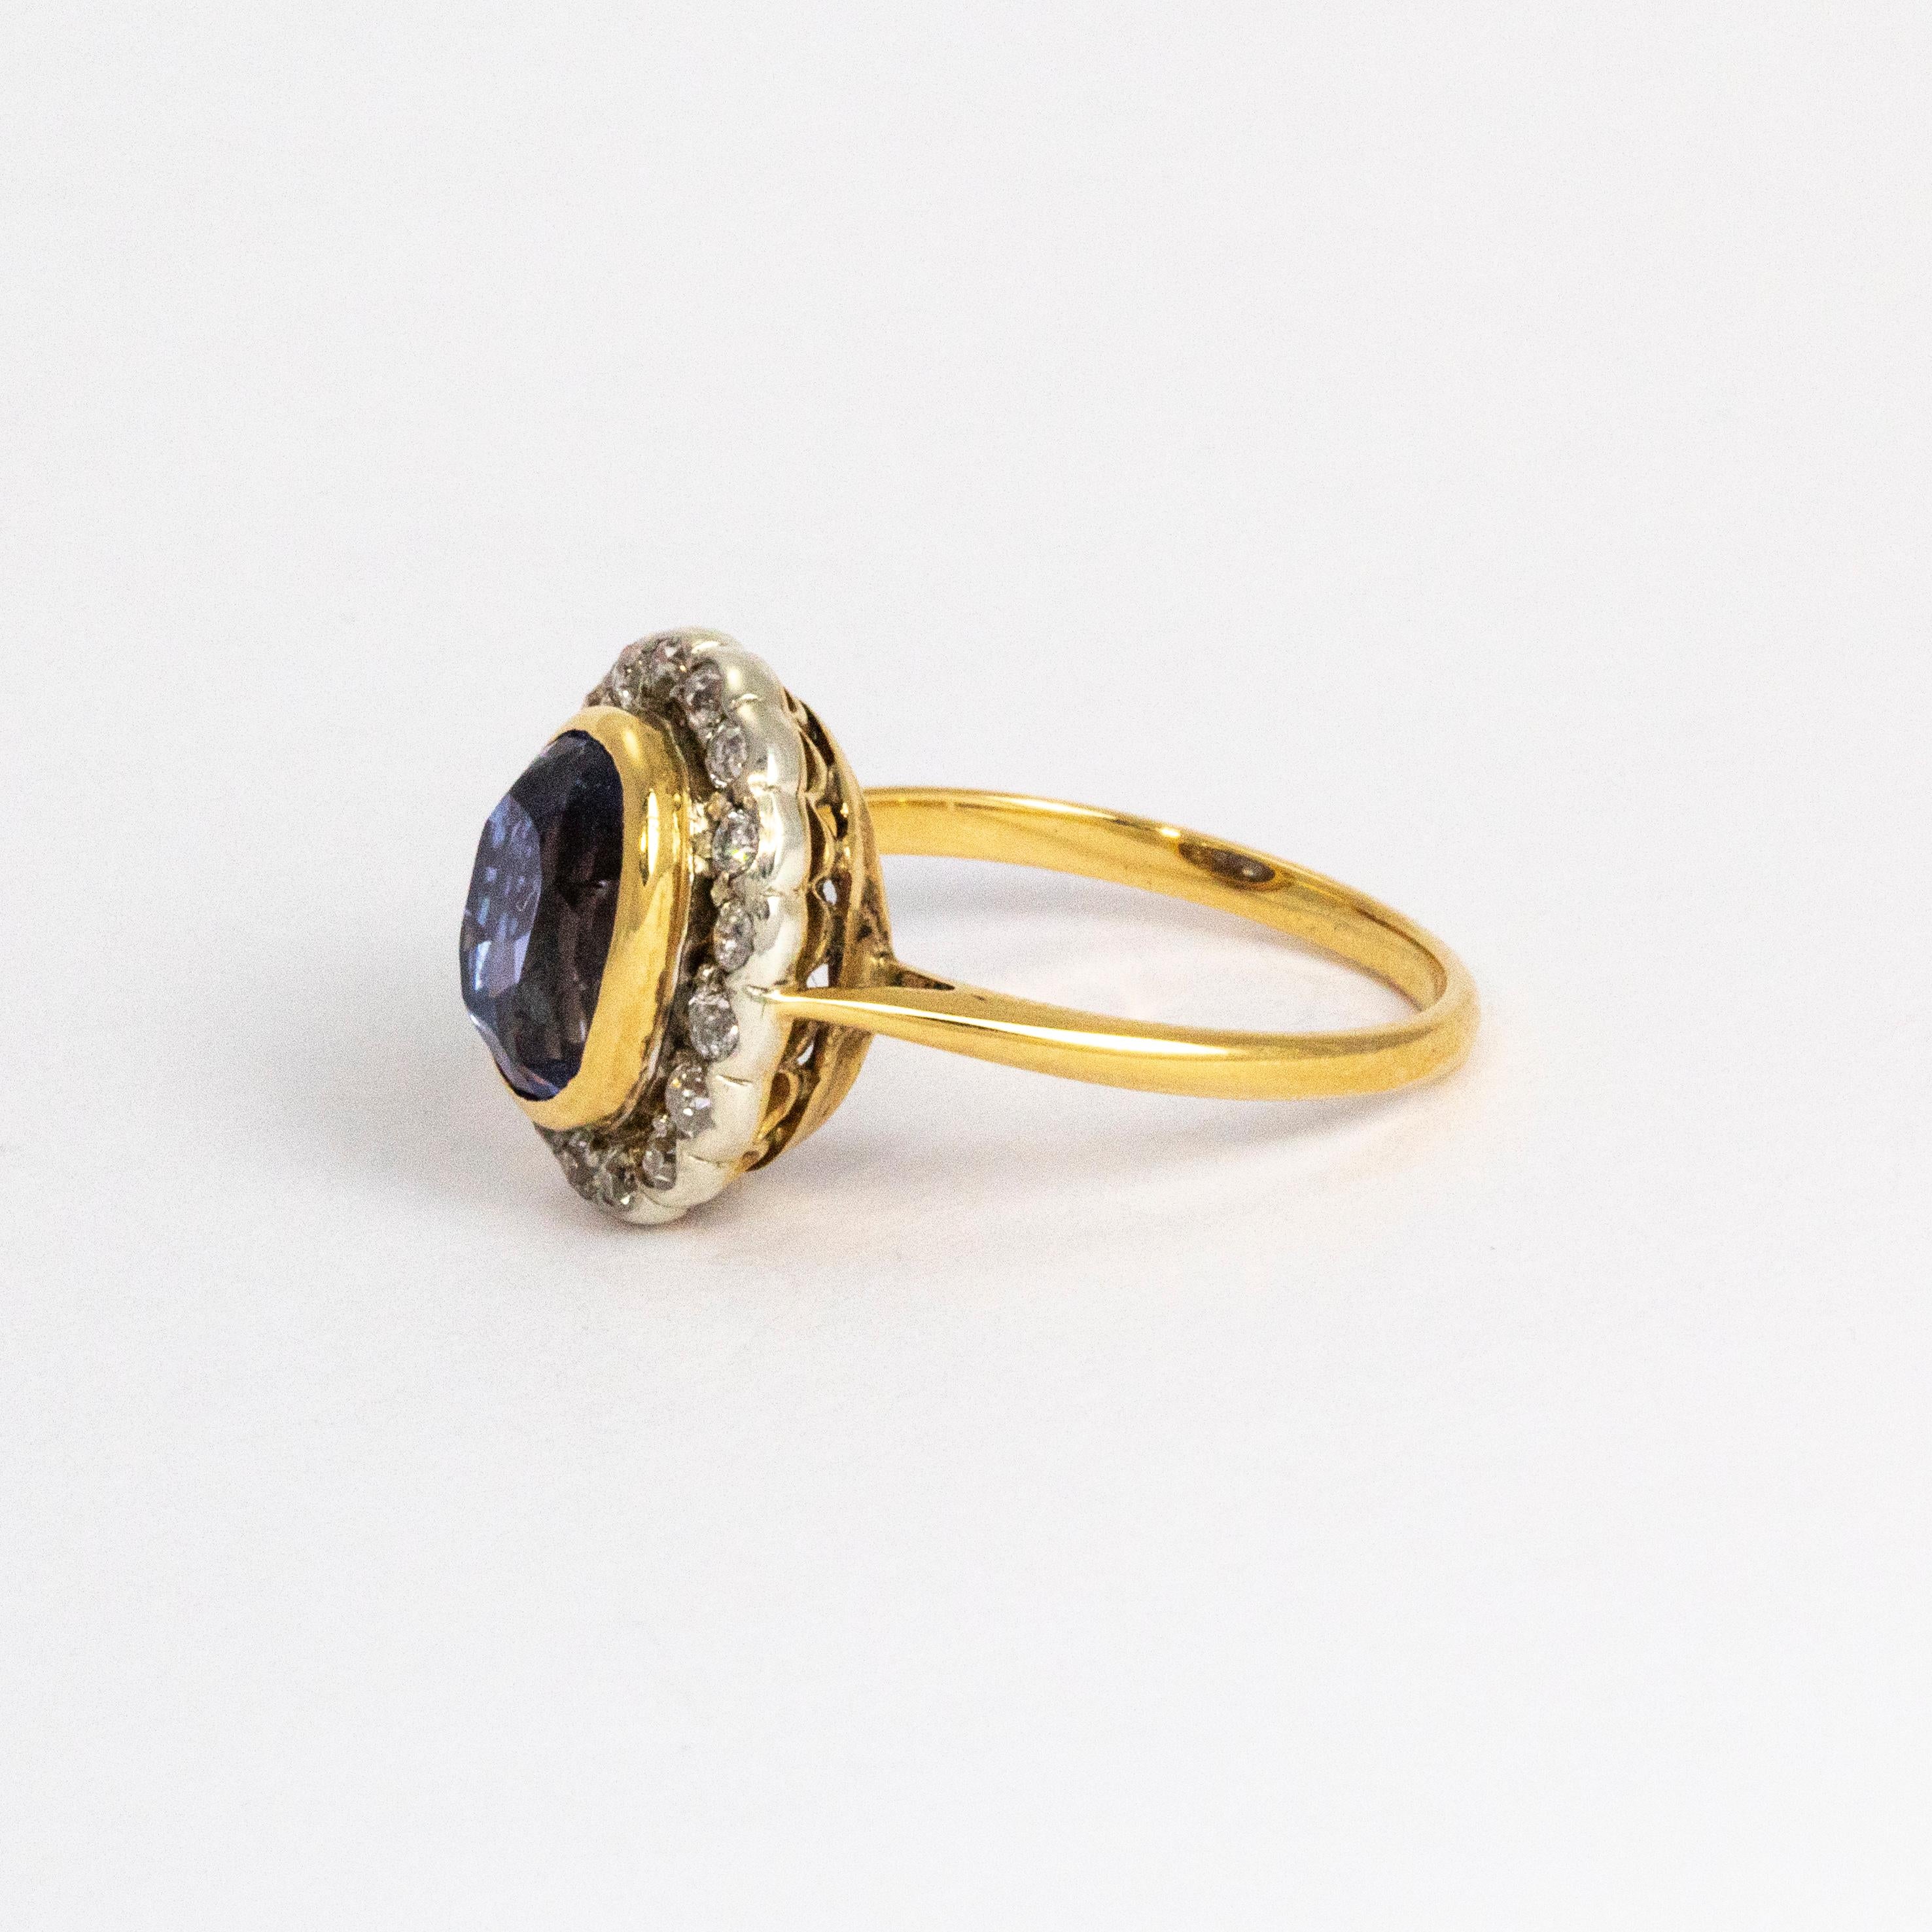 Absolutely stunning Sapphire ring, the Sapphire measuring approximately 1.50ct and is surrounded by shimmering old mine cut diamonds supported by a fine gallery.

Ring Size: K or 5 1/4